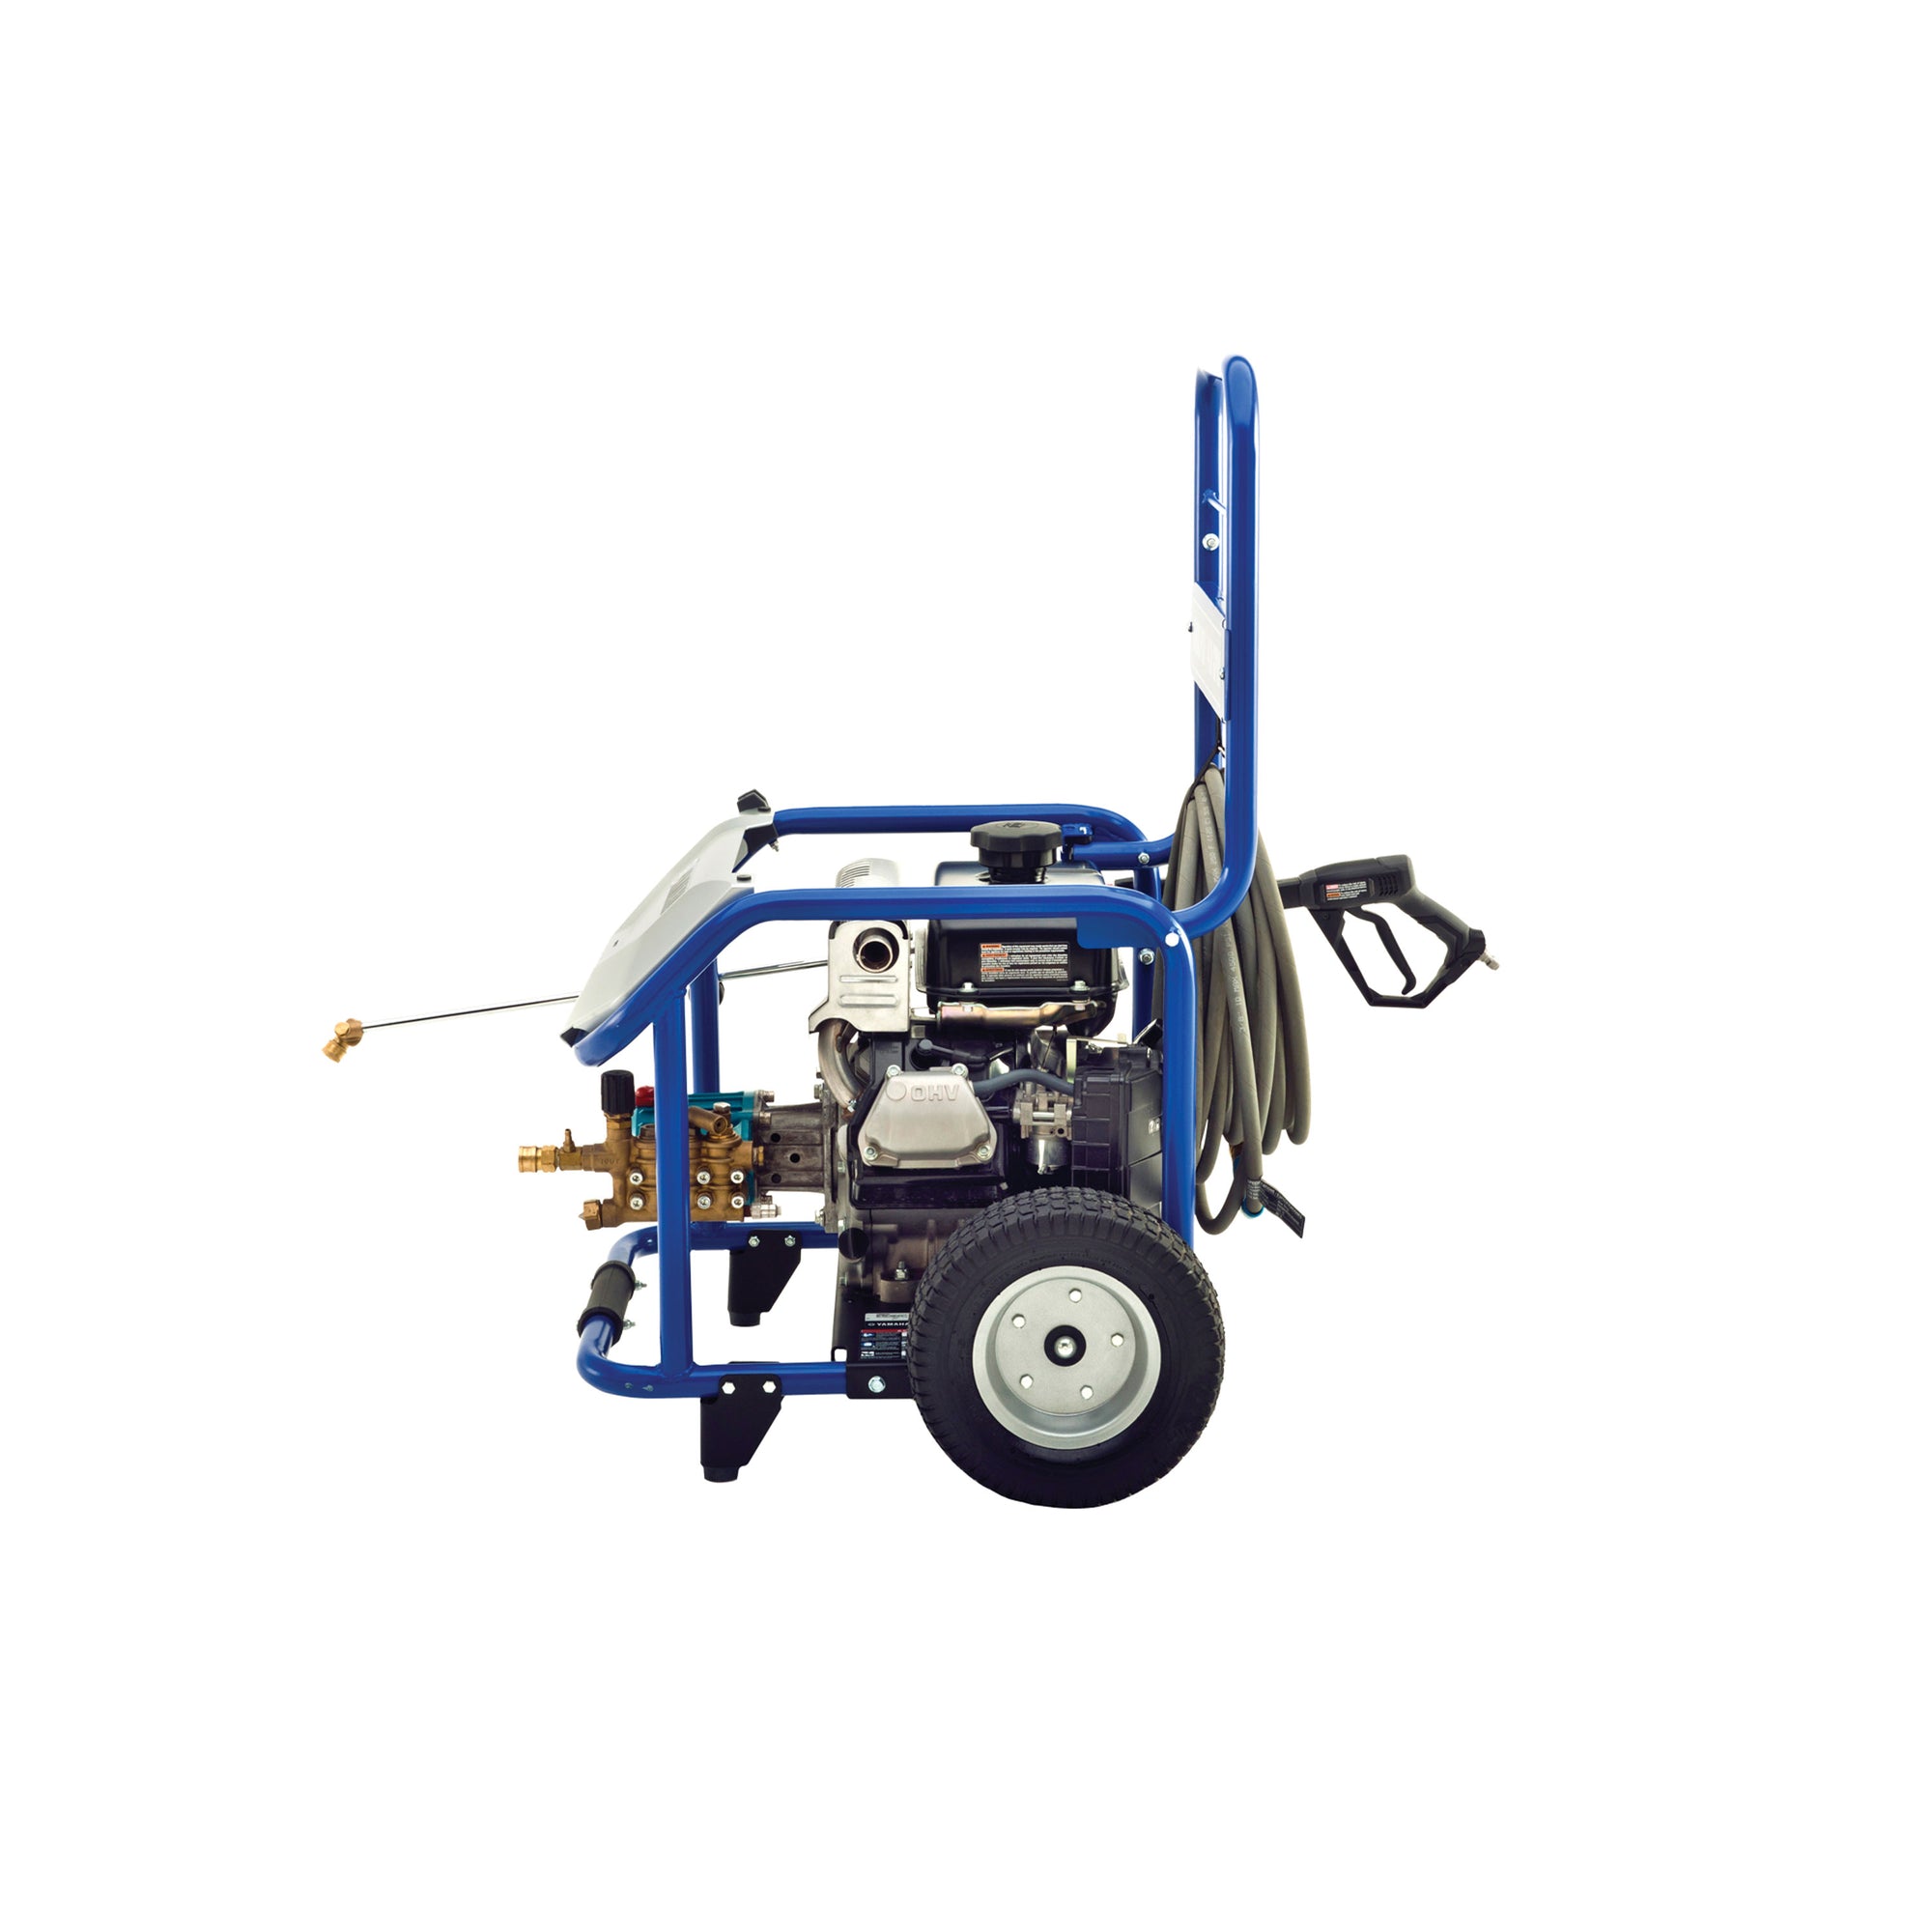 Yamaha PW4040A Pressure Washer 4000 PSI with Wheels